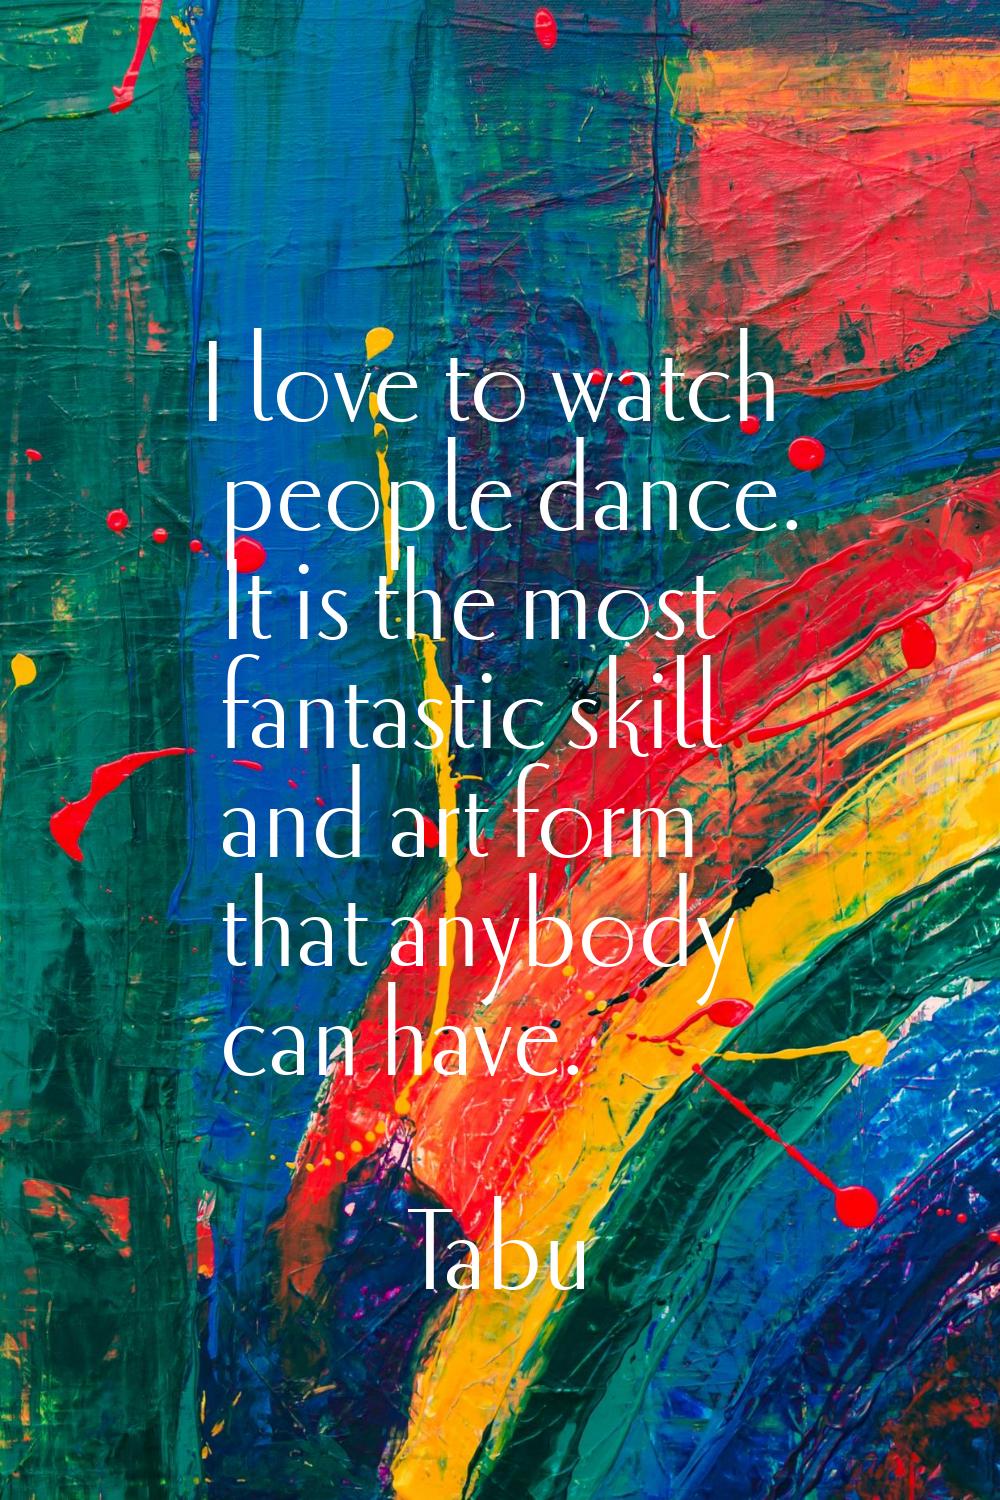 I love to watch people dance. It is the most fantastic skill and art form that anybody can have.